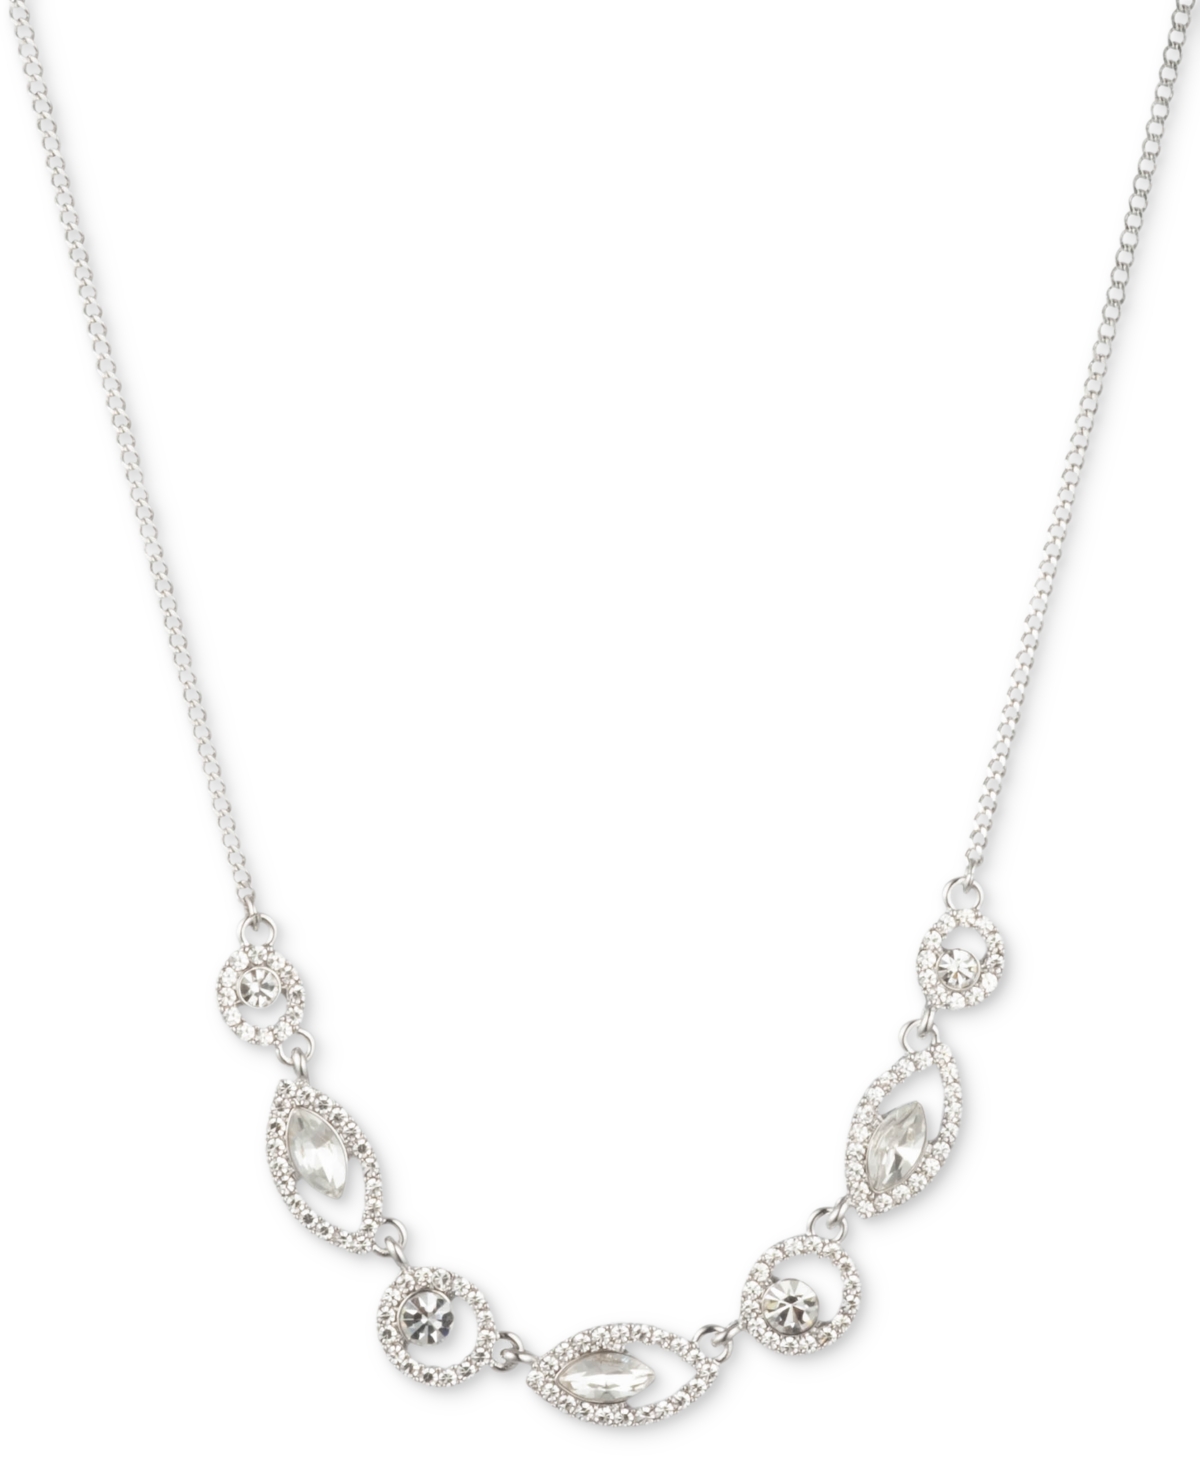 Pave Crystal Orb Frontal Necklace, 16" + 3" extender - Rhodium